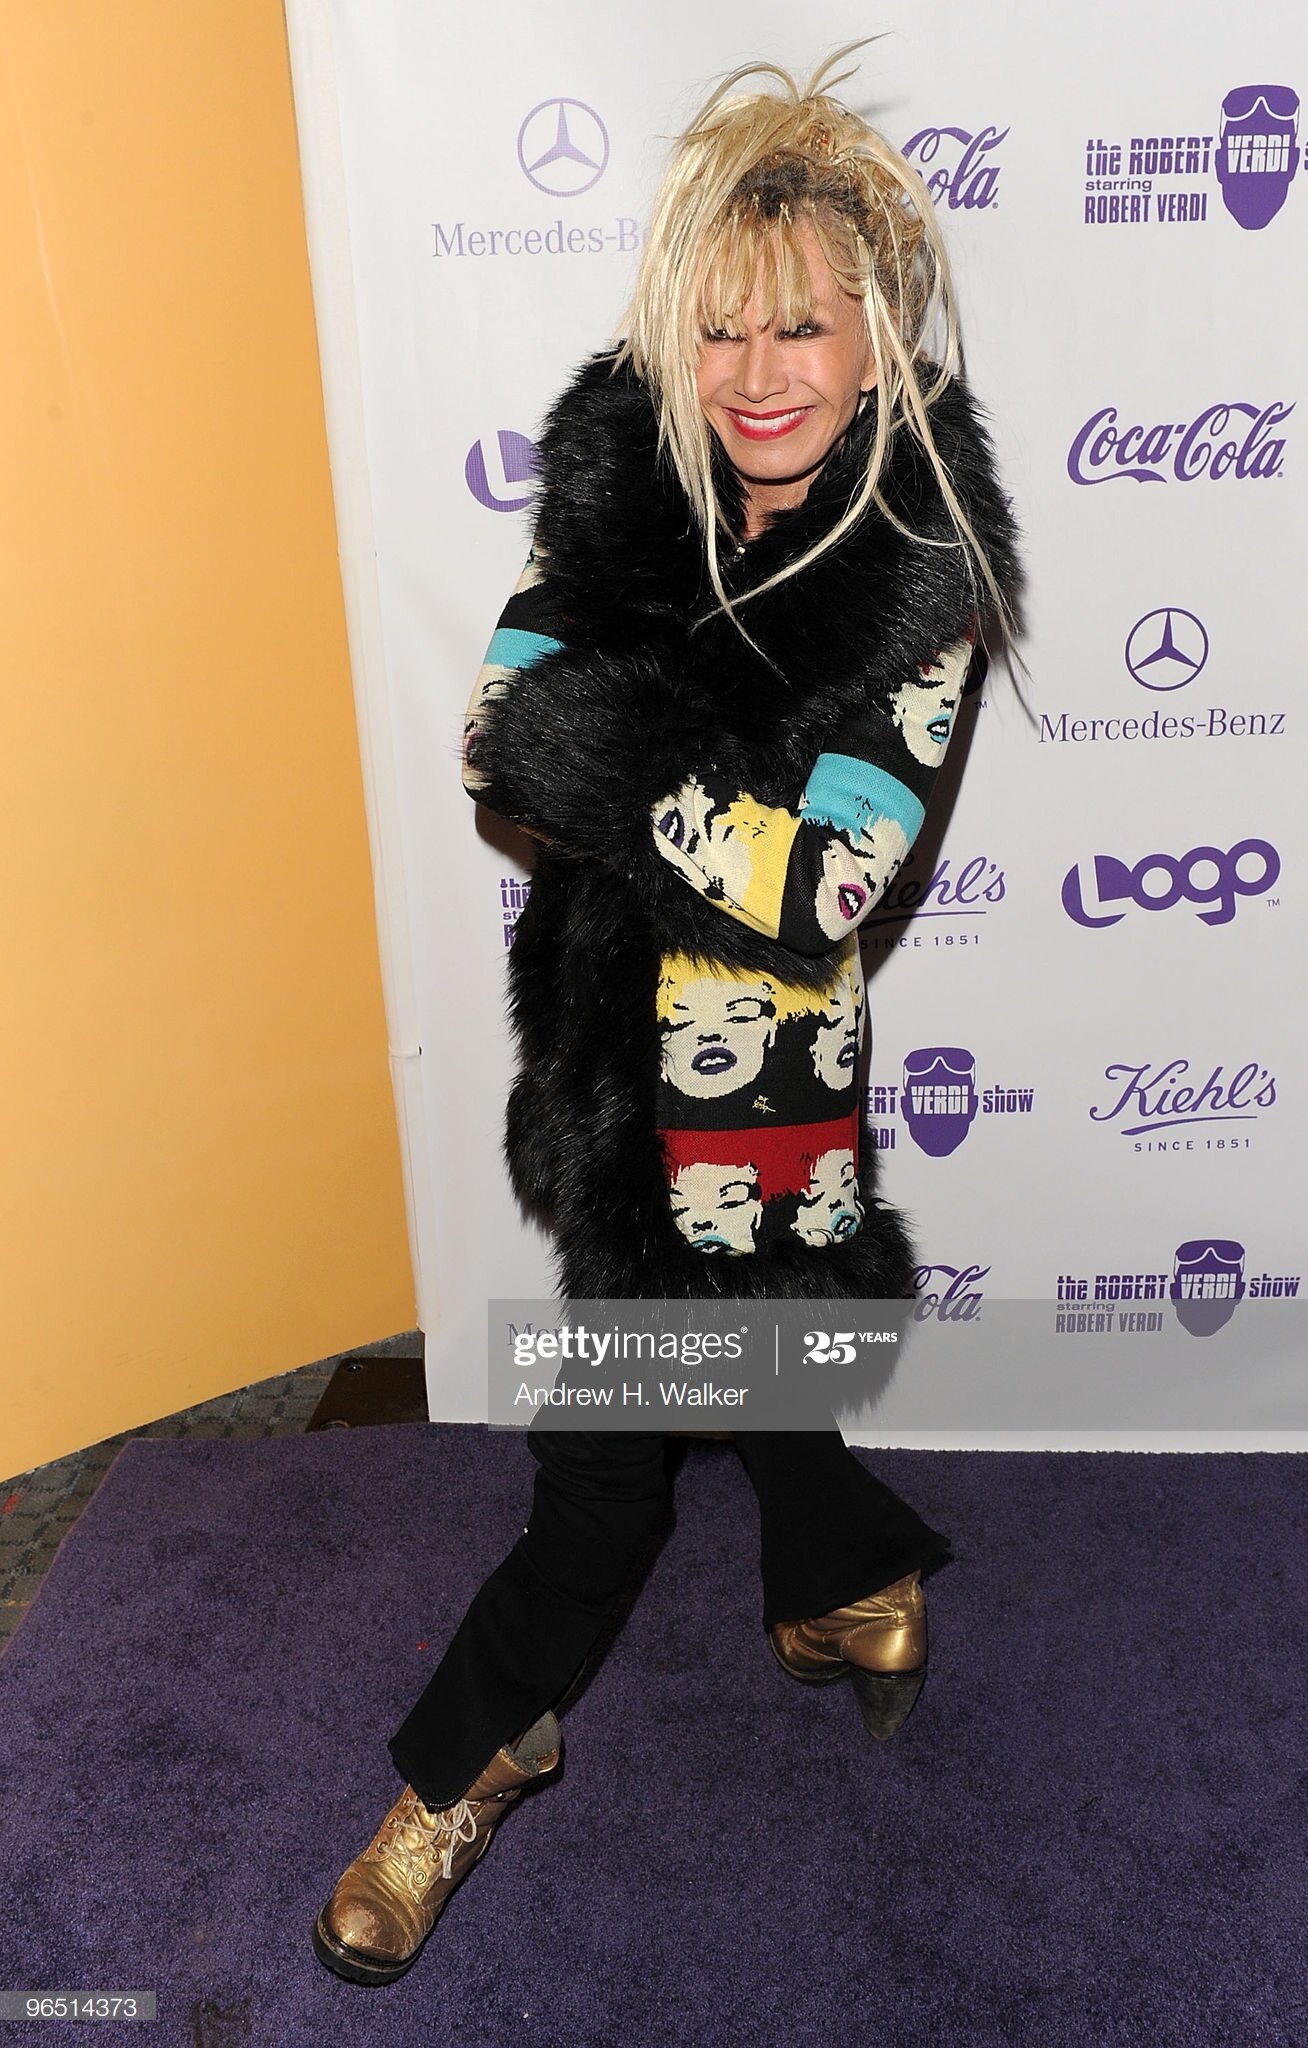  NEW YORK - FEBRUARY 08:  Fashion designer Betsey Johnson attends the premiere screening of "The Robert Verdi Show Starring Robert Verdi" at the SVA Theater on February 8, 2010 in New York City.  (Photo by Andrew H. Walker/Getty Images) 